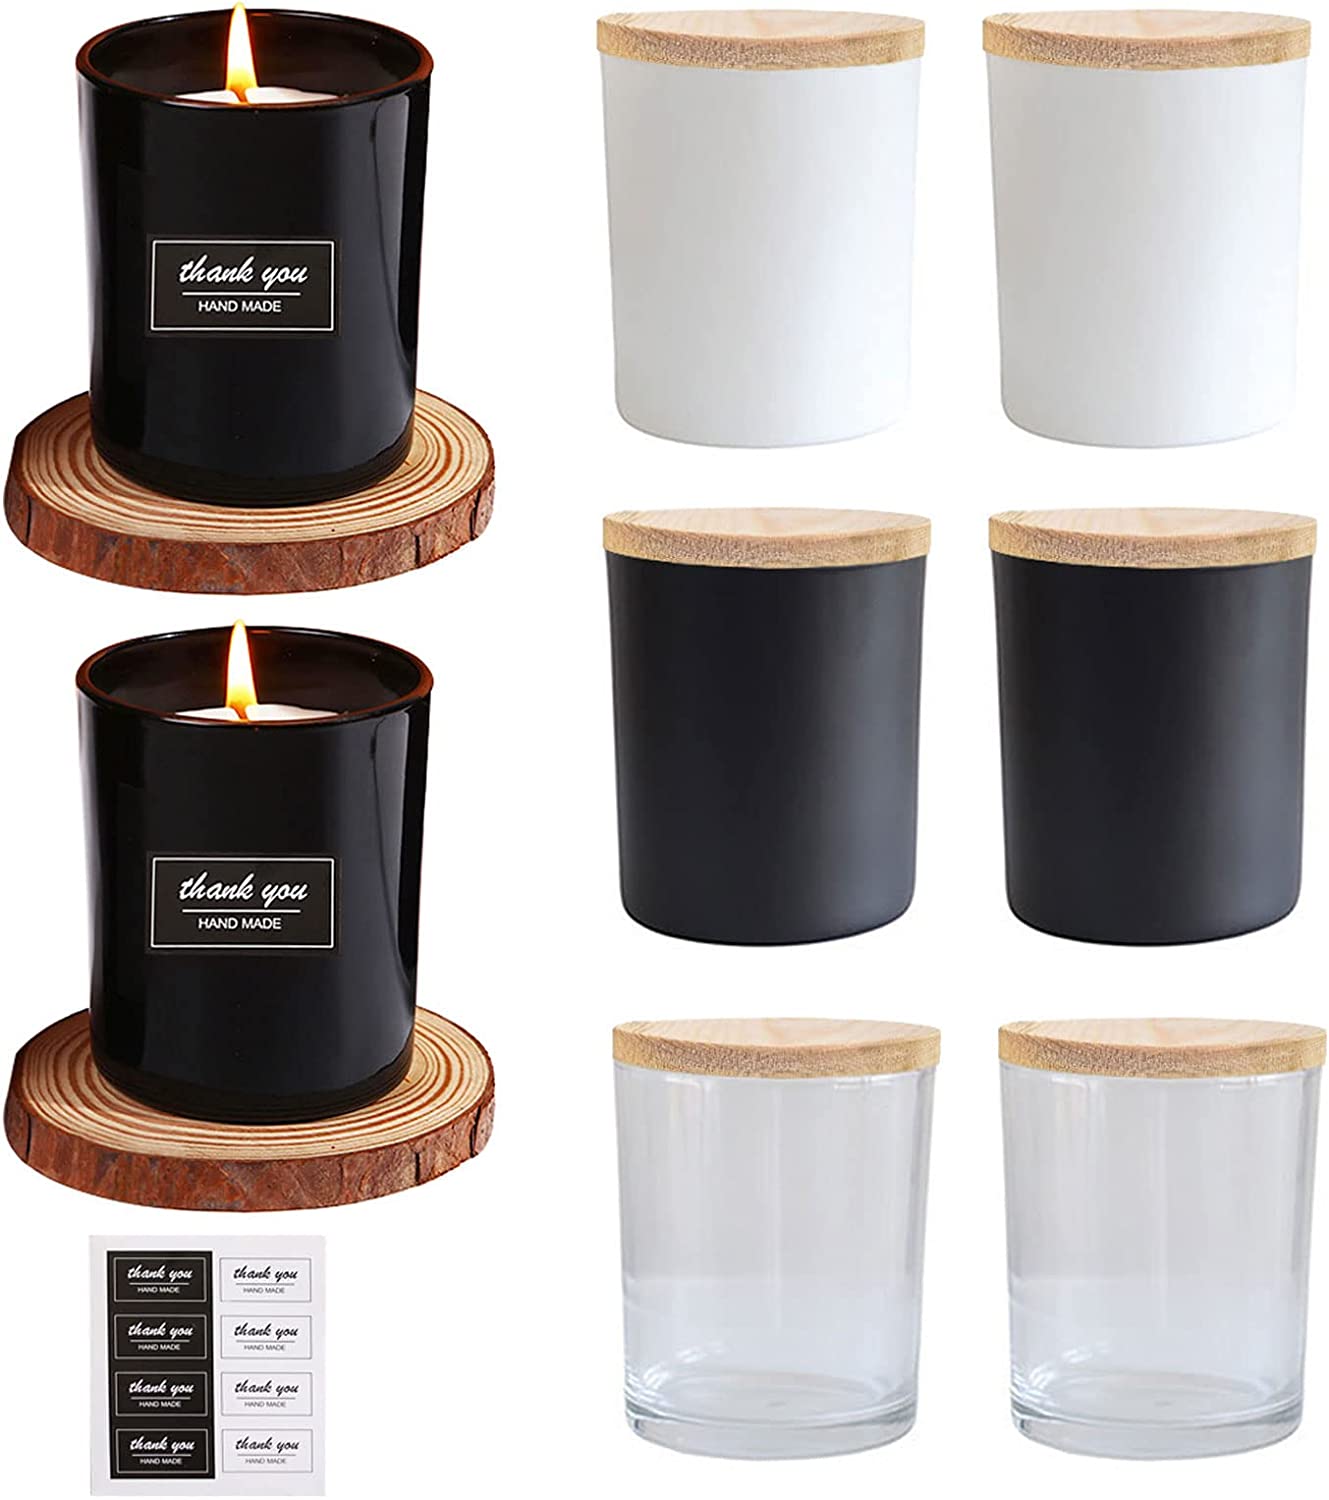  Tioncy 20 Pcs 7 oz Candle Jars with Bamboo Lids for